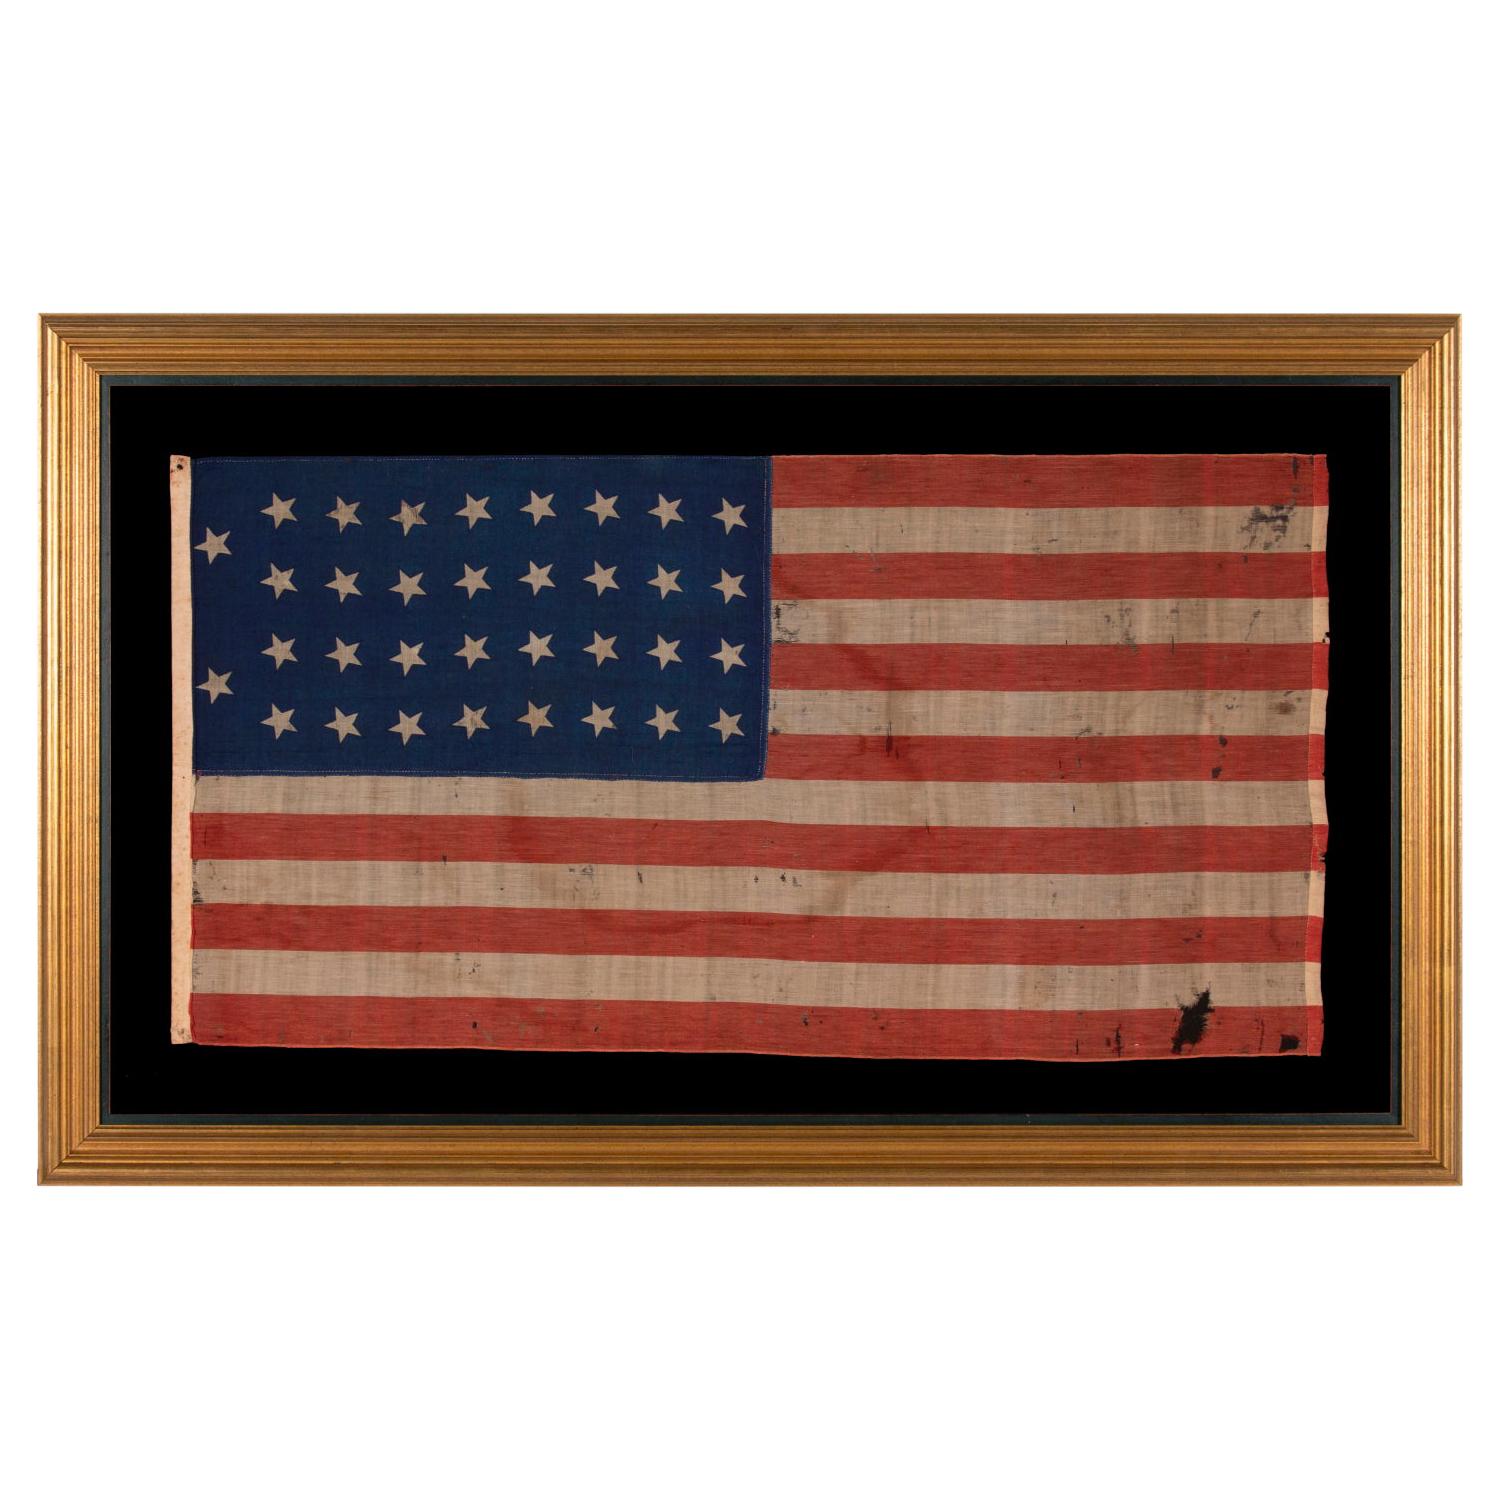 34 Star, Kansas Statehood, Parade Flag, Likely a Union Army Camp Colors